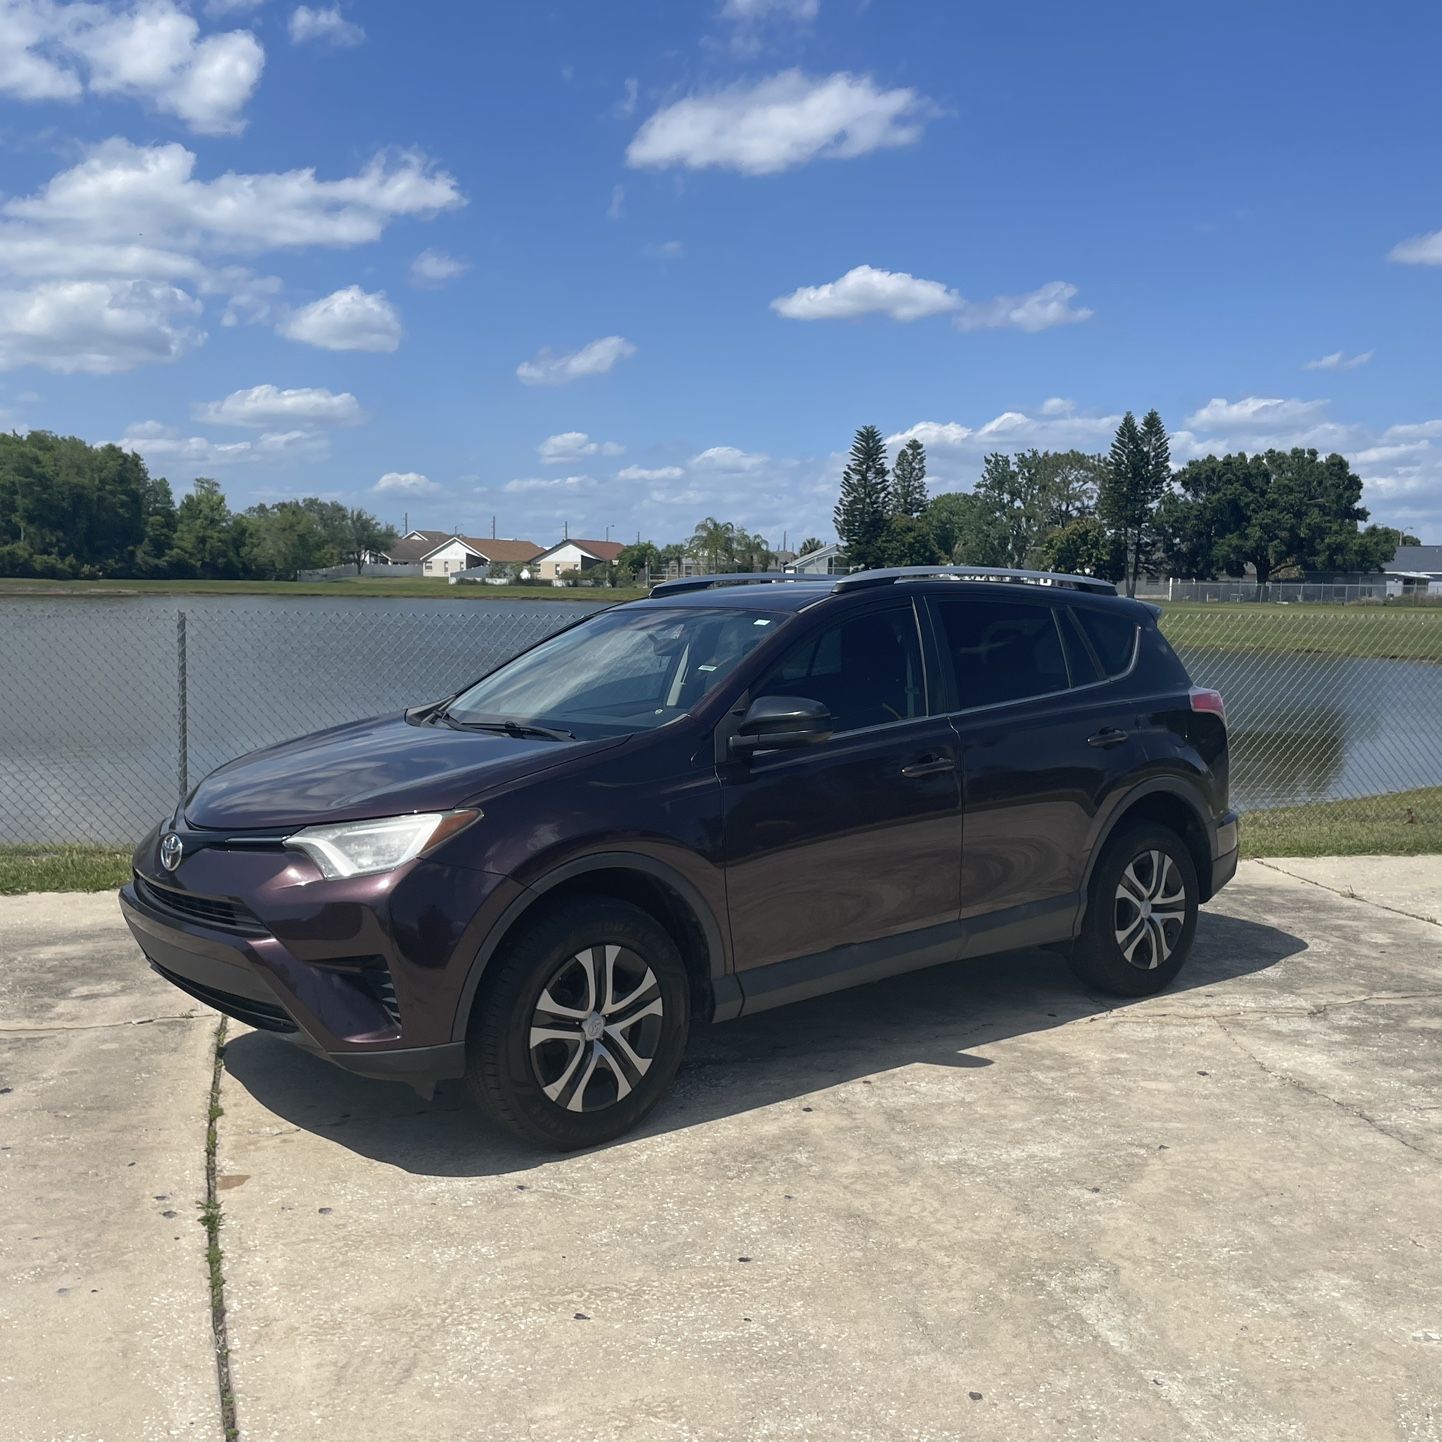 2016 TOYOTA RAV4
✅ Look Perfect     ✅ 1 Owner 
✅  Clean Title         ✅ 142 000 Miles  
✅  Looks New

✅ 407-799-1171
Located in  ORLANDO, FL